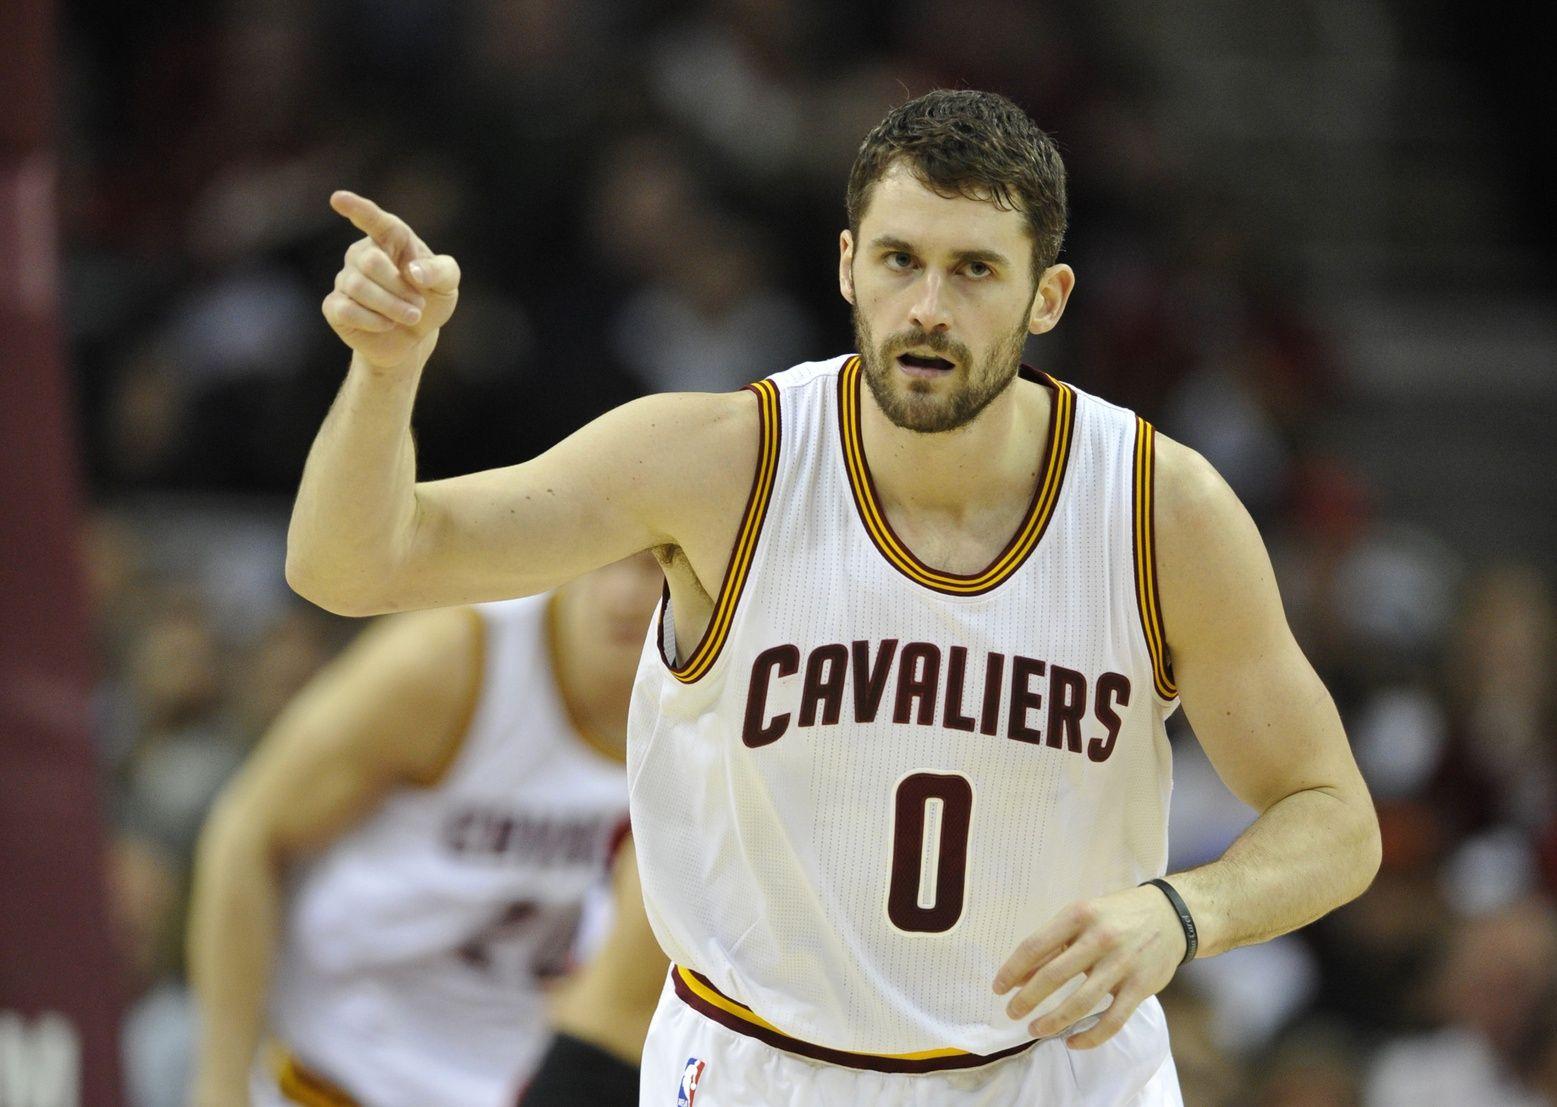 Kevin Love believes playoffs could sway LeBron James' decision